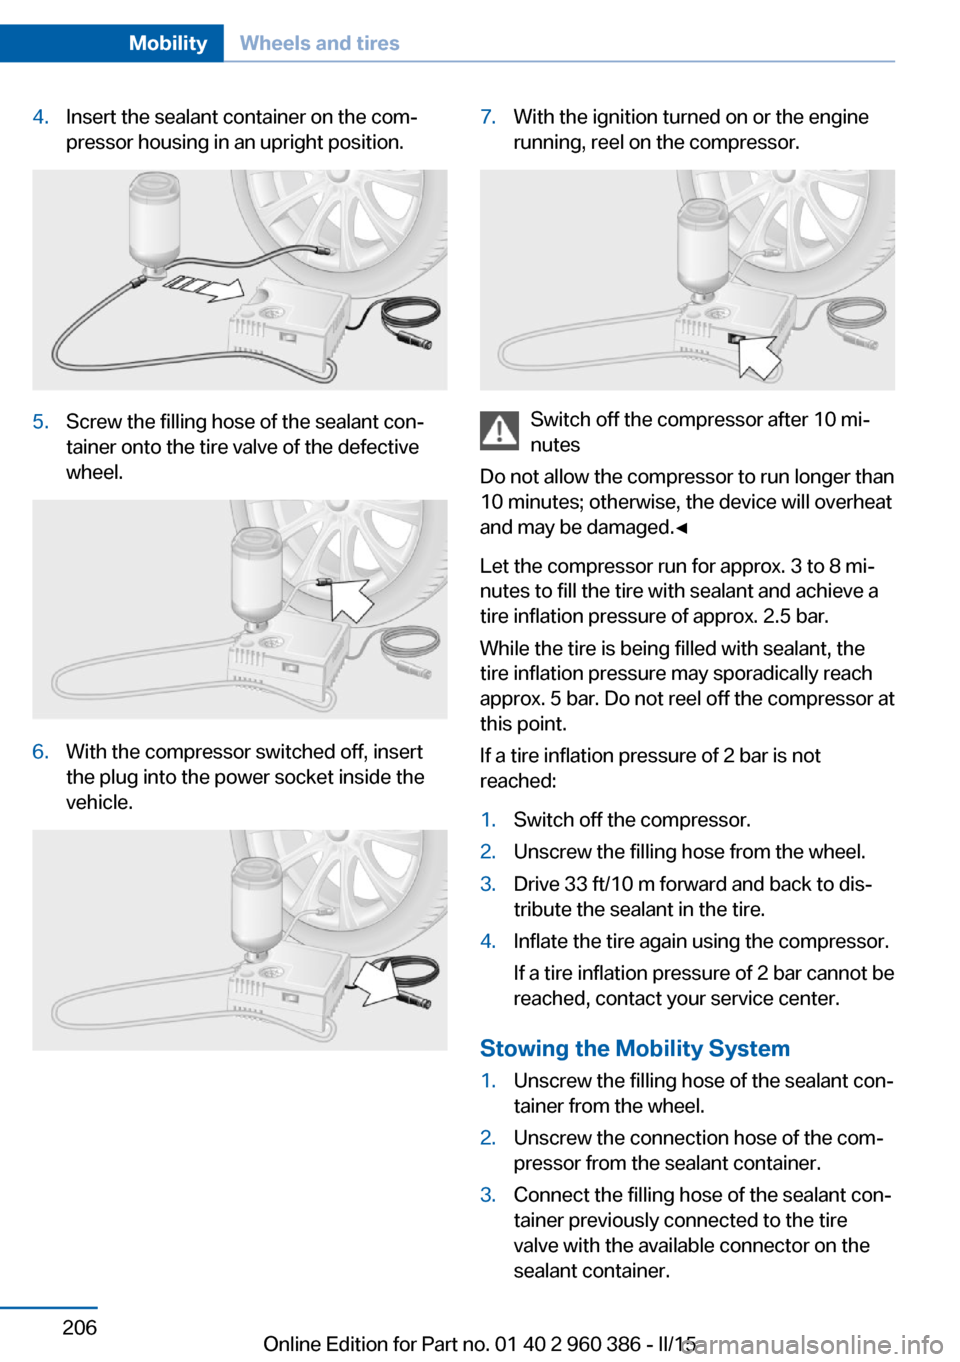 BMW X3 2015 F25 Owners Manual 4.Insert the sealant container on the com‐
pressor housing in an upright position.5.Screw the filling hose of the sealant con‐
tainer onto the tire valve of the defective
wheel.6.With the compress